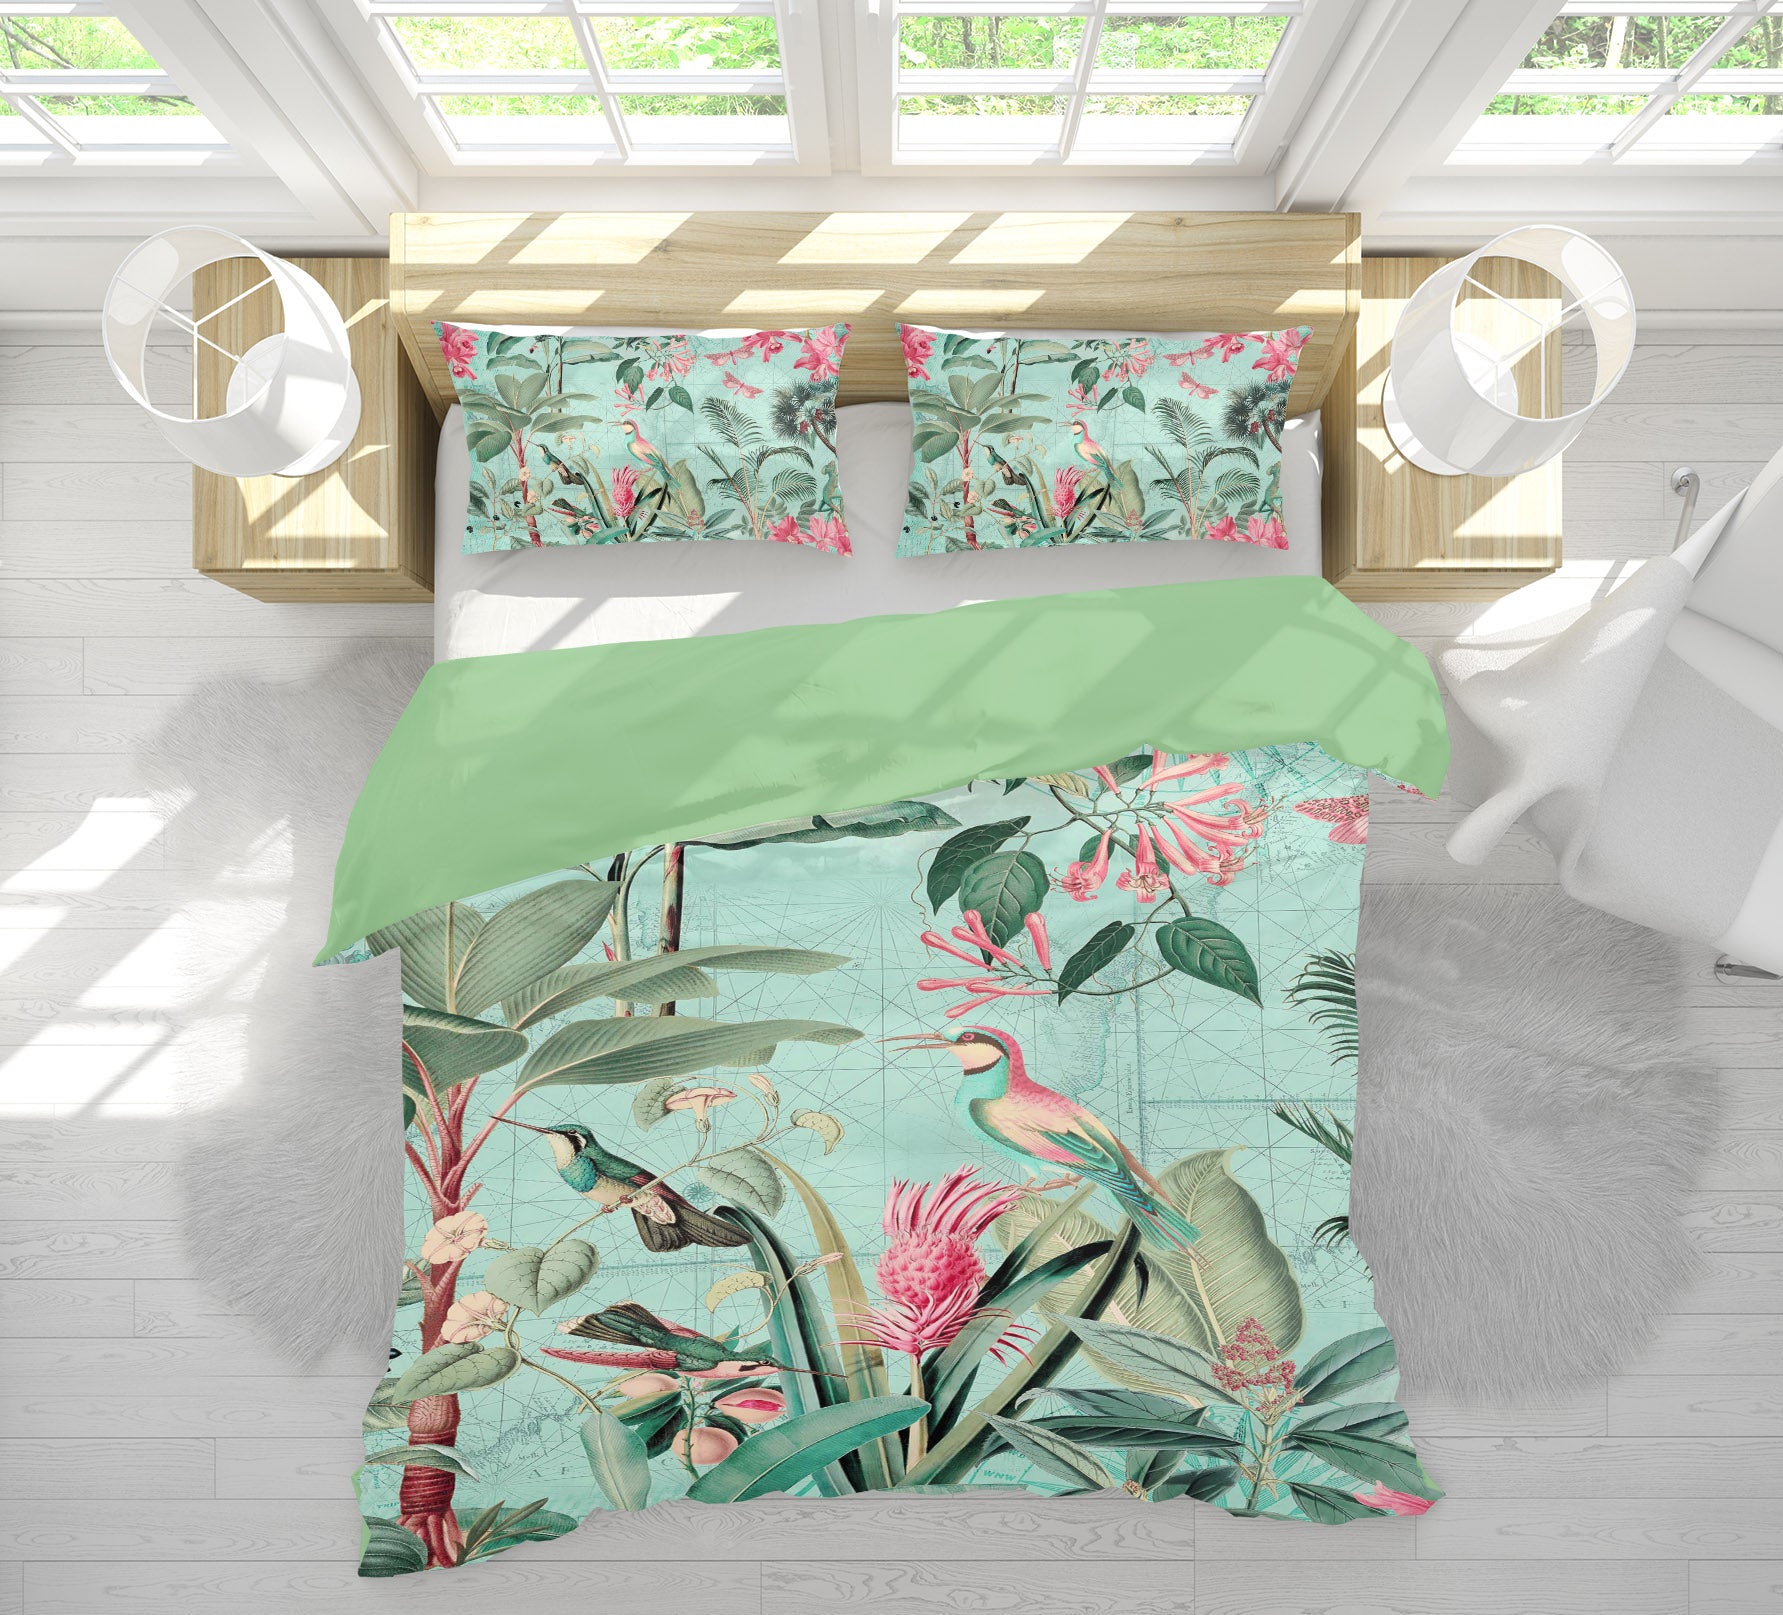 3D Happy Forest 127 Andrea haase Bedding Bed Pillowcases Quilt